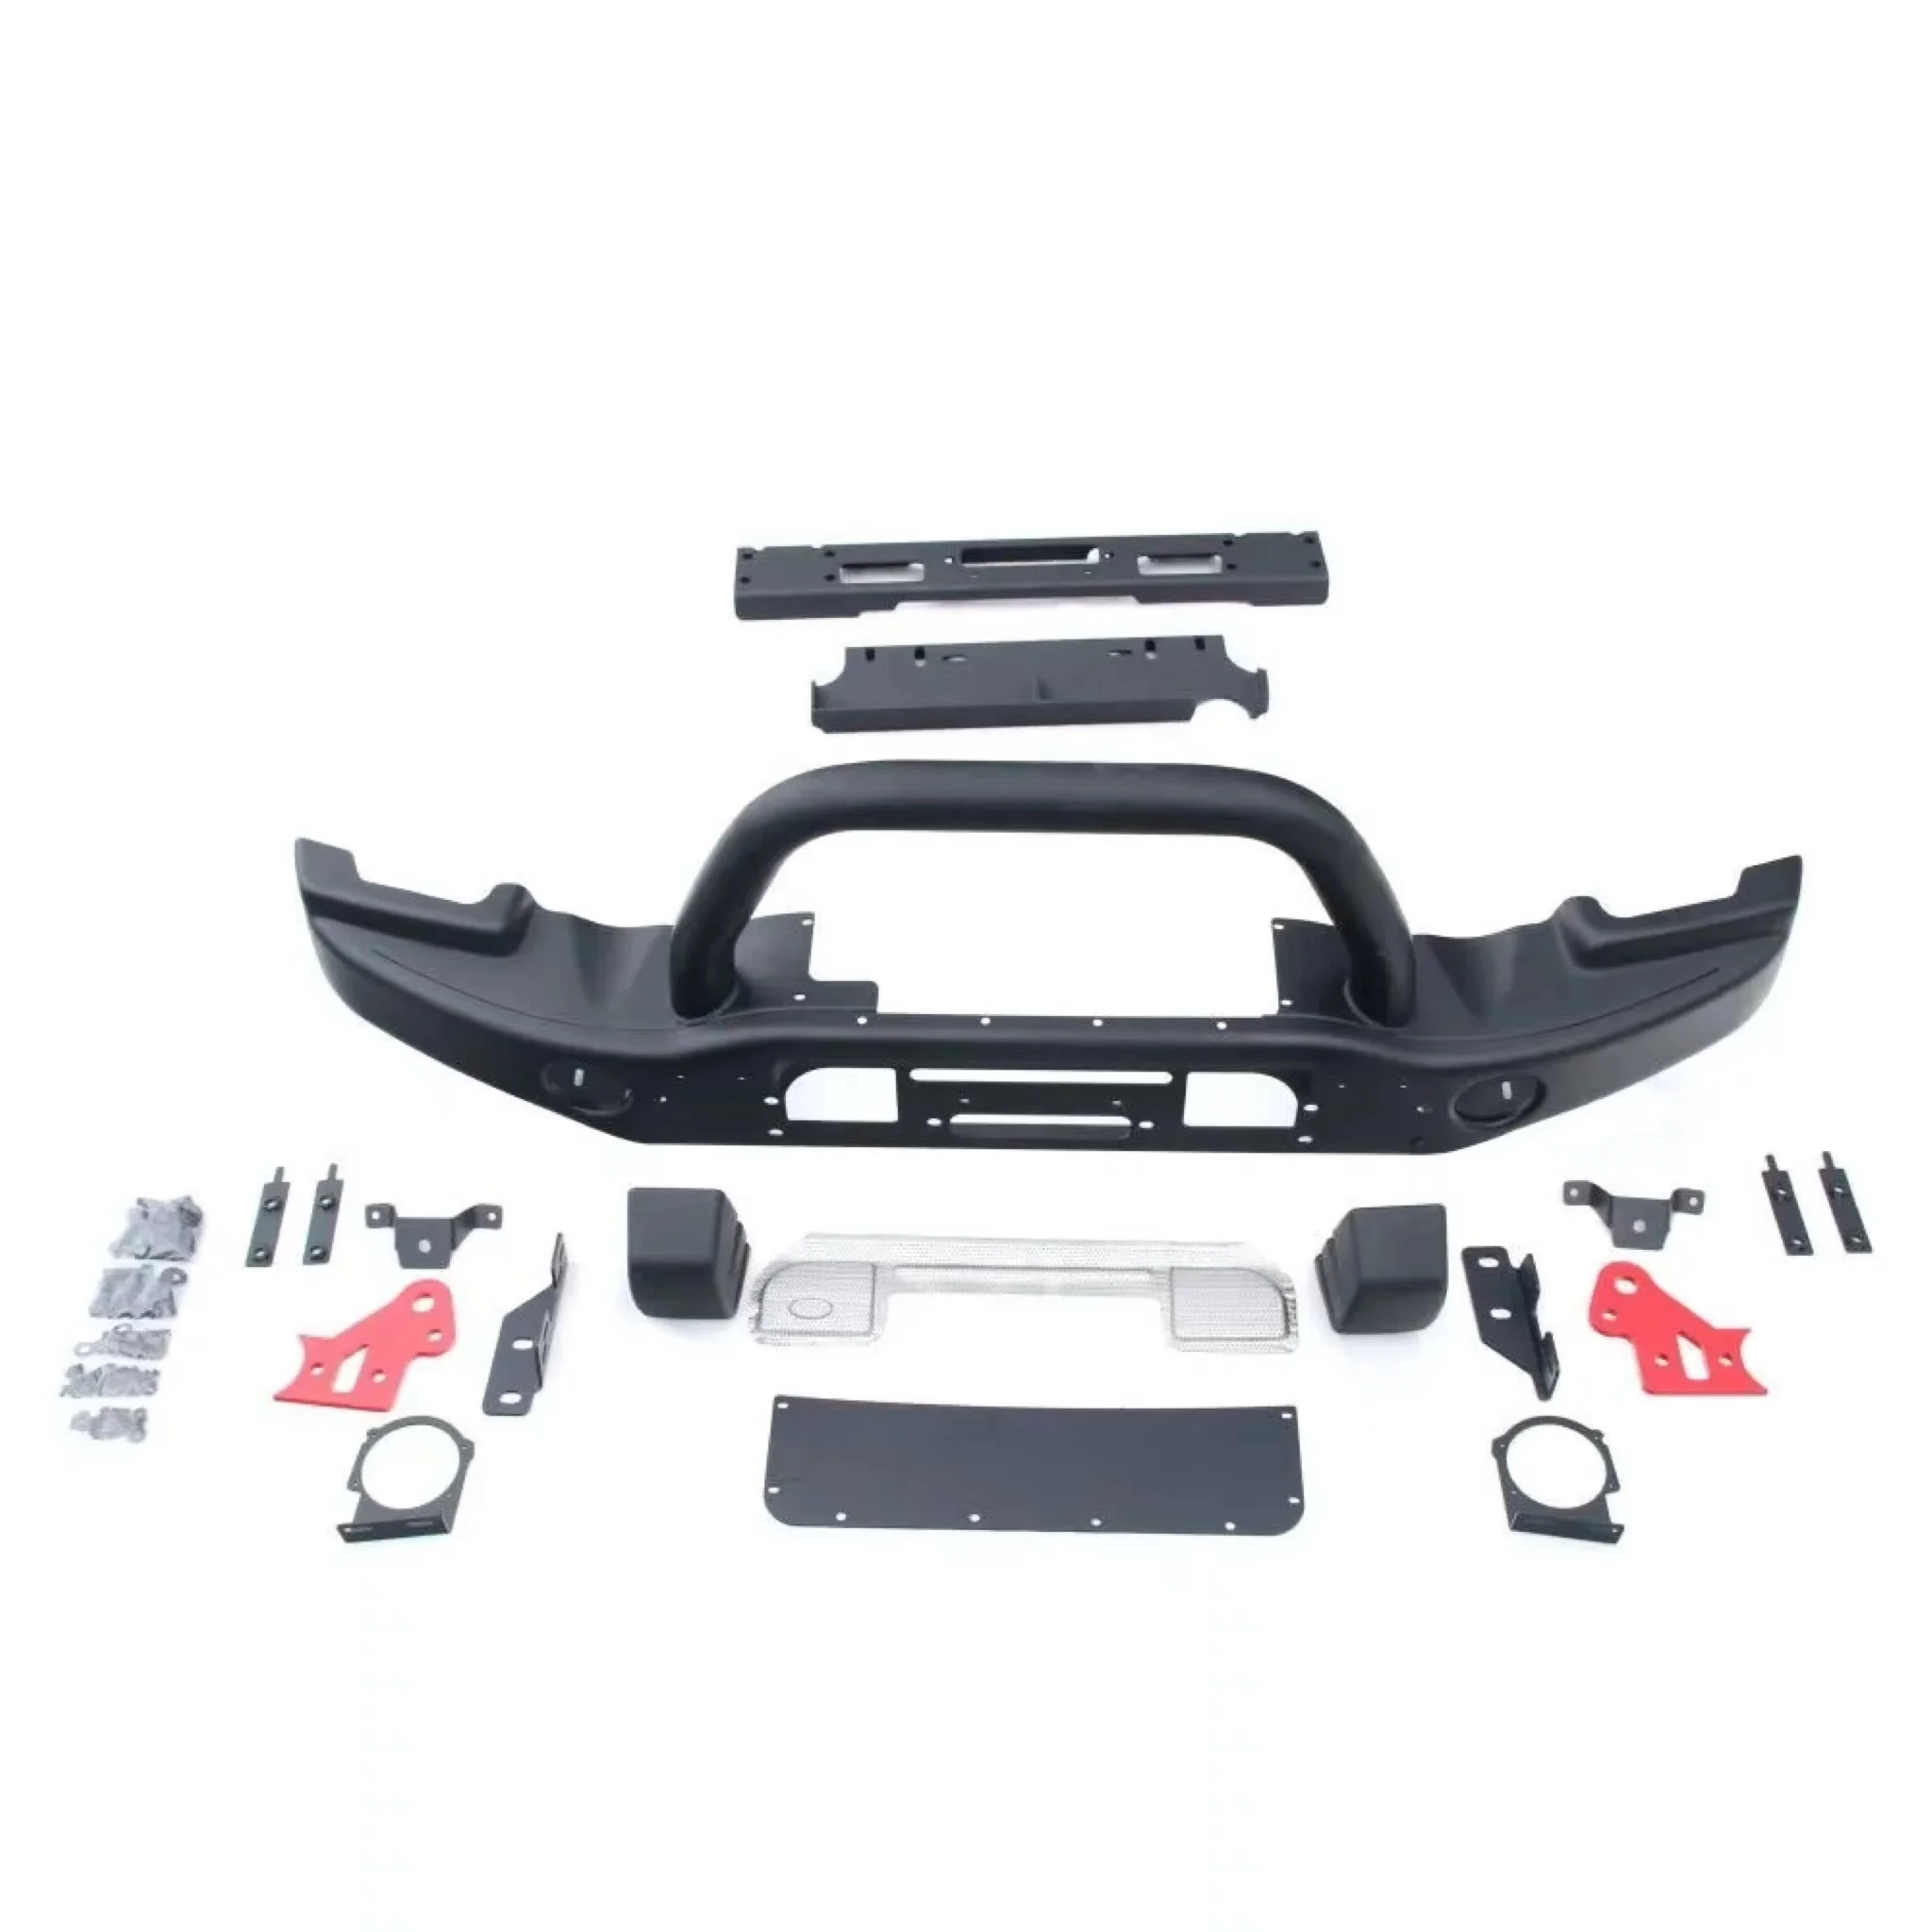 Front Bumper with Winch Cradle,Bullbar,Tow Rings for 07-17 jeep Wrangler JK/JKU